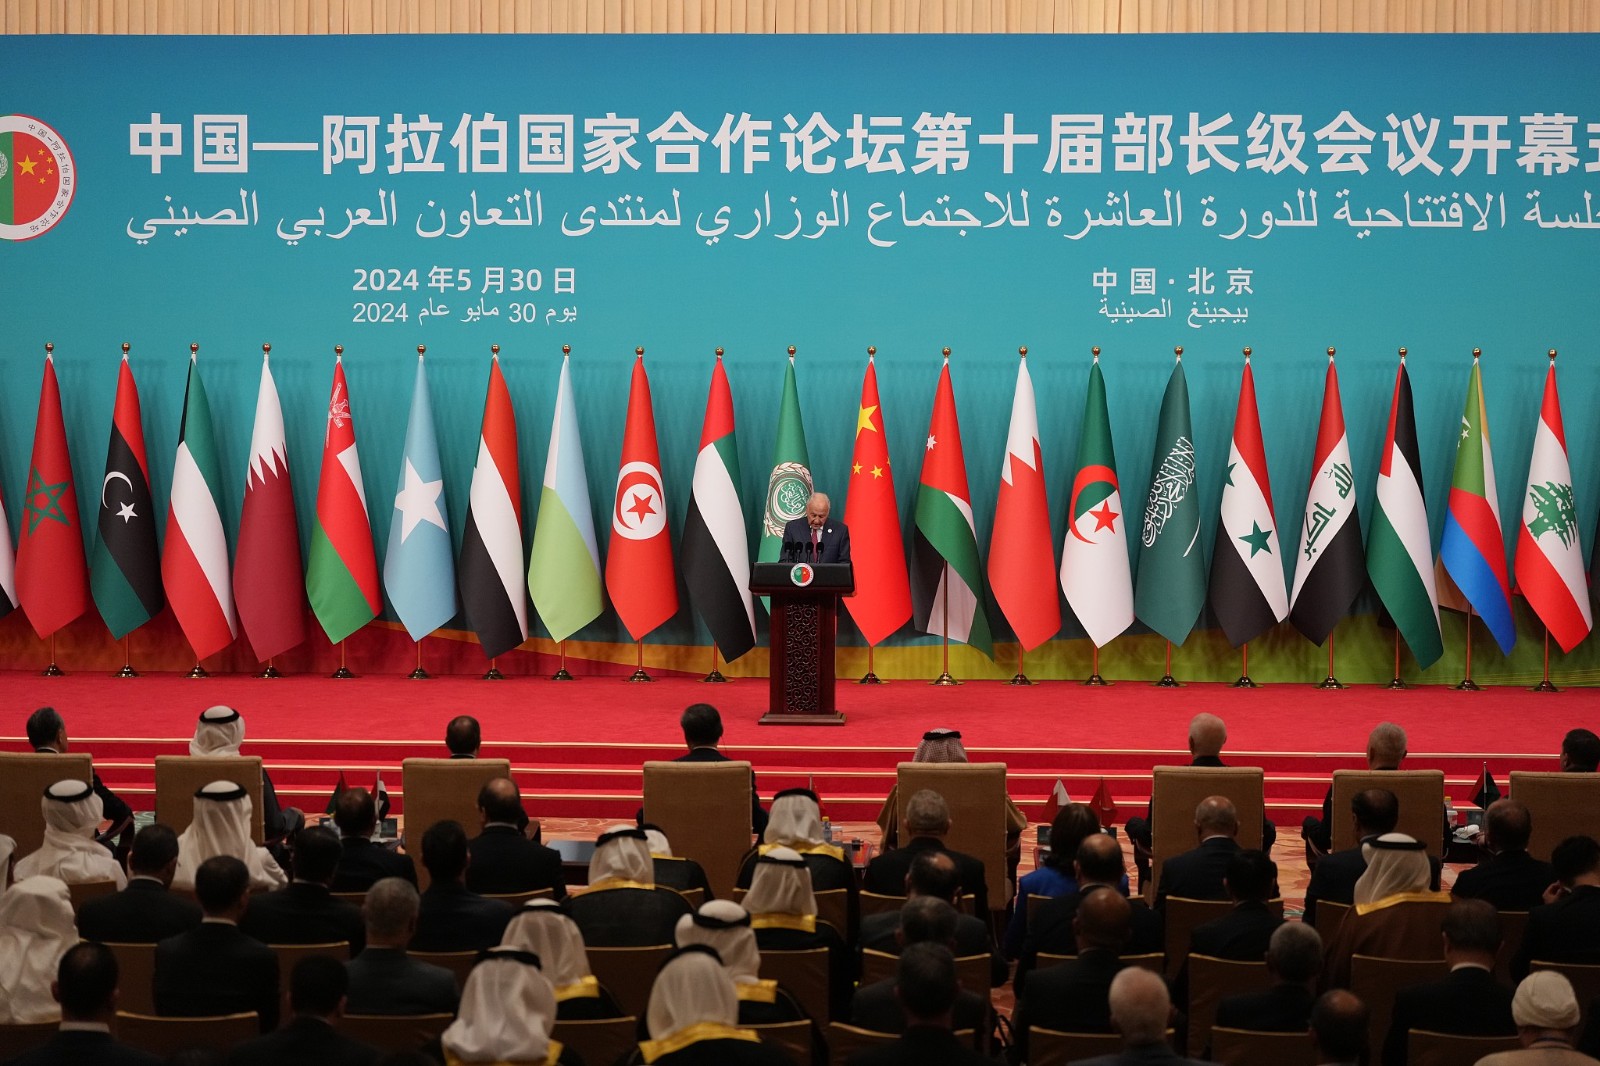 The opening ceremony of the 10th ministerial meeting of the China-Arab States Cooperation Forum held in Beijing, May 30, 2024. /CFP